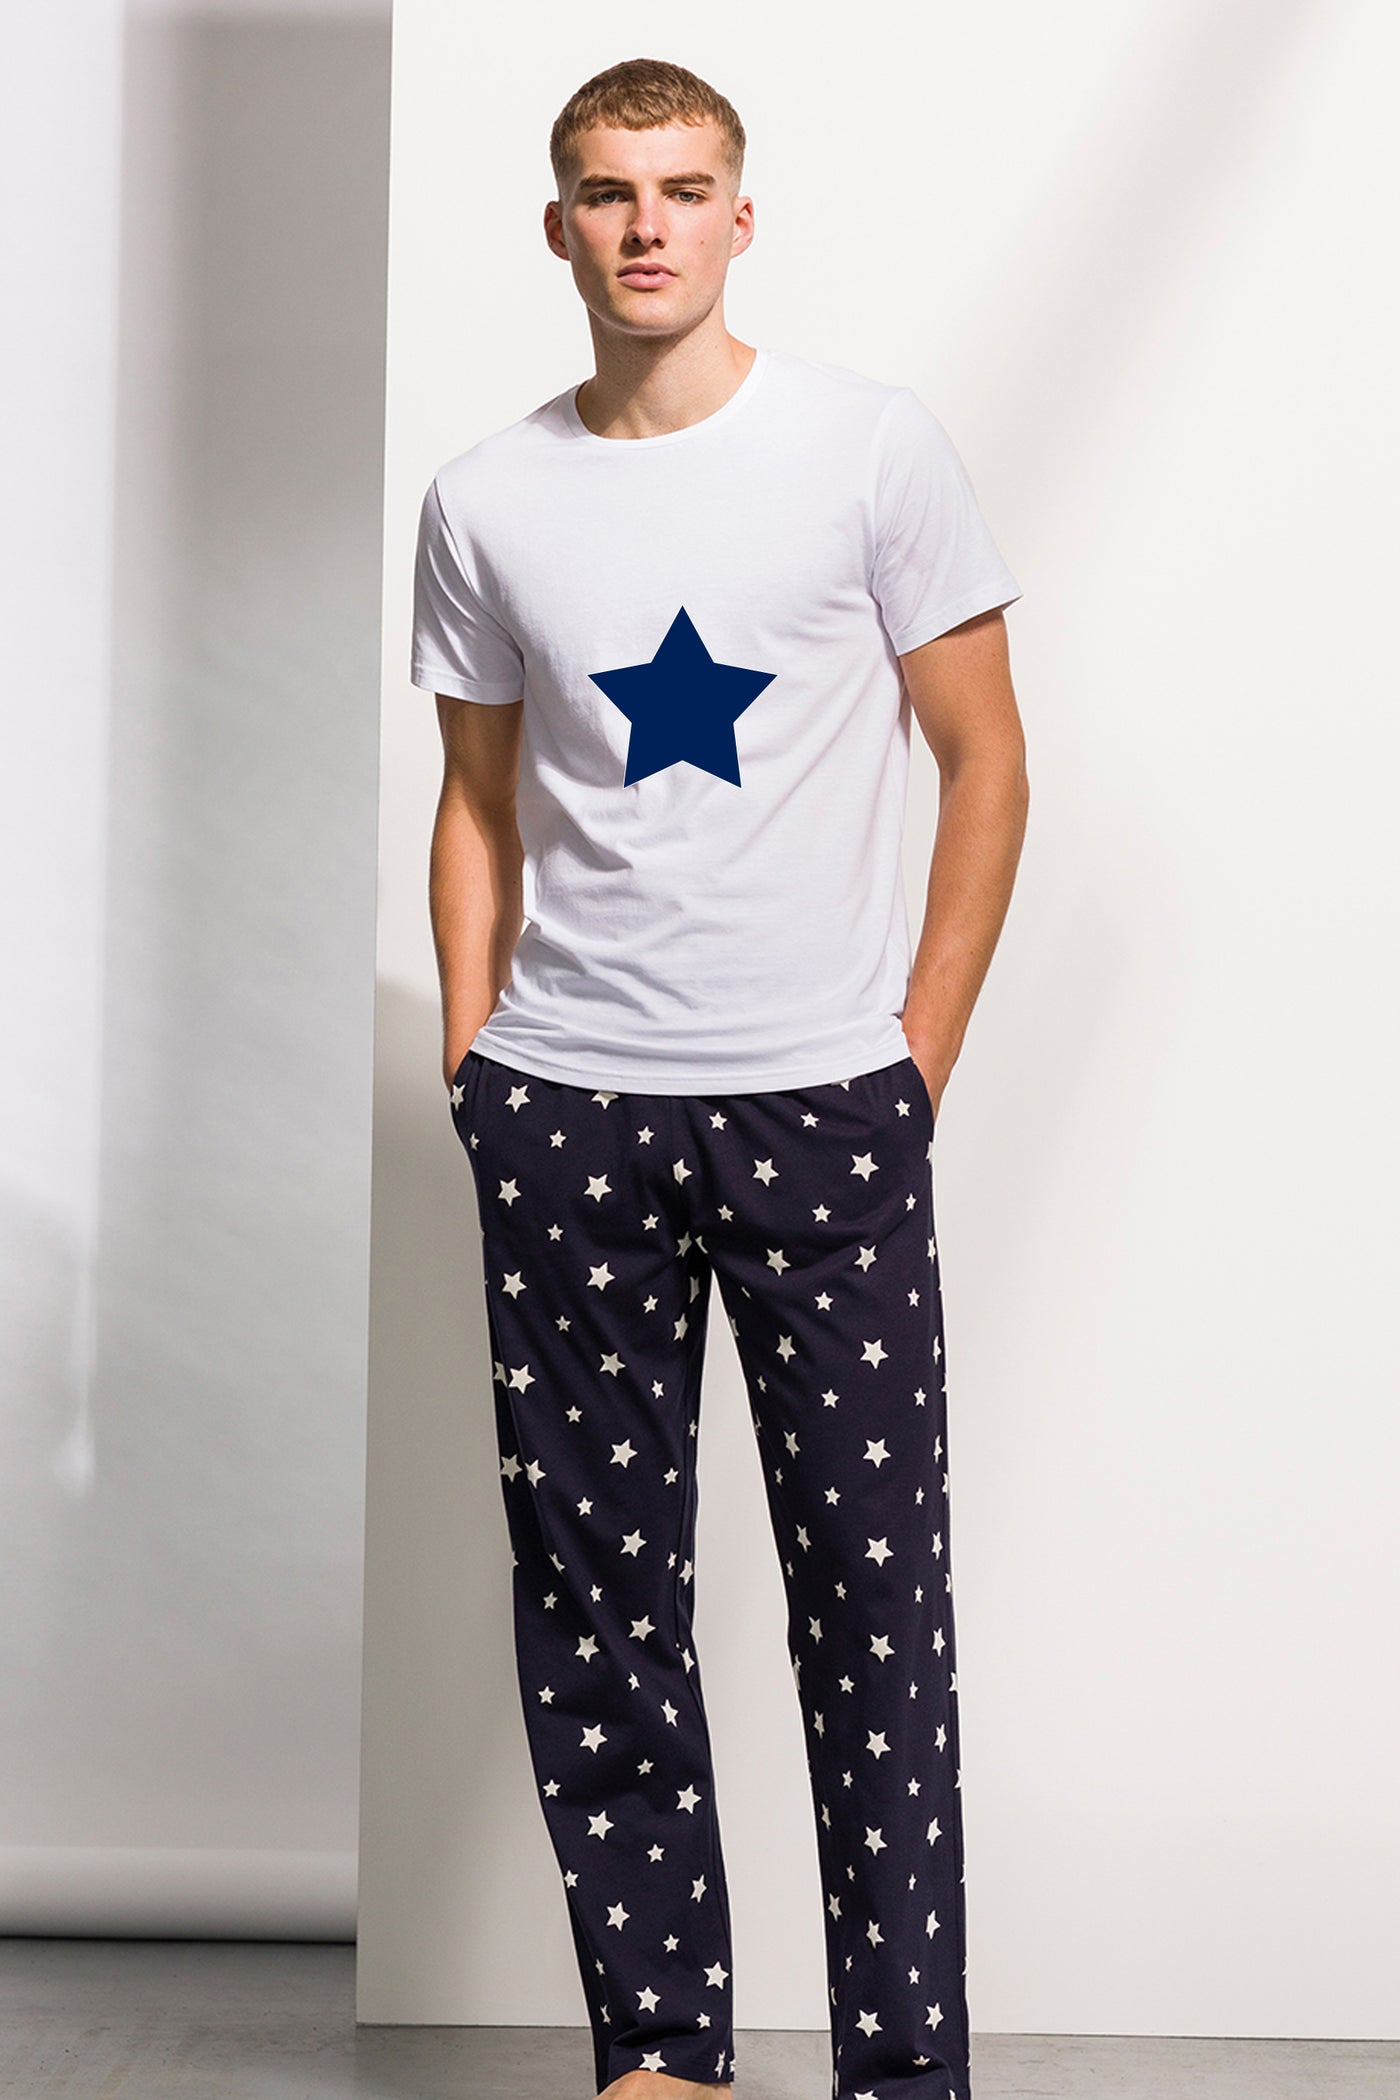 Mens personalised Christmas pyjamas in navy and white